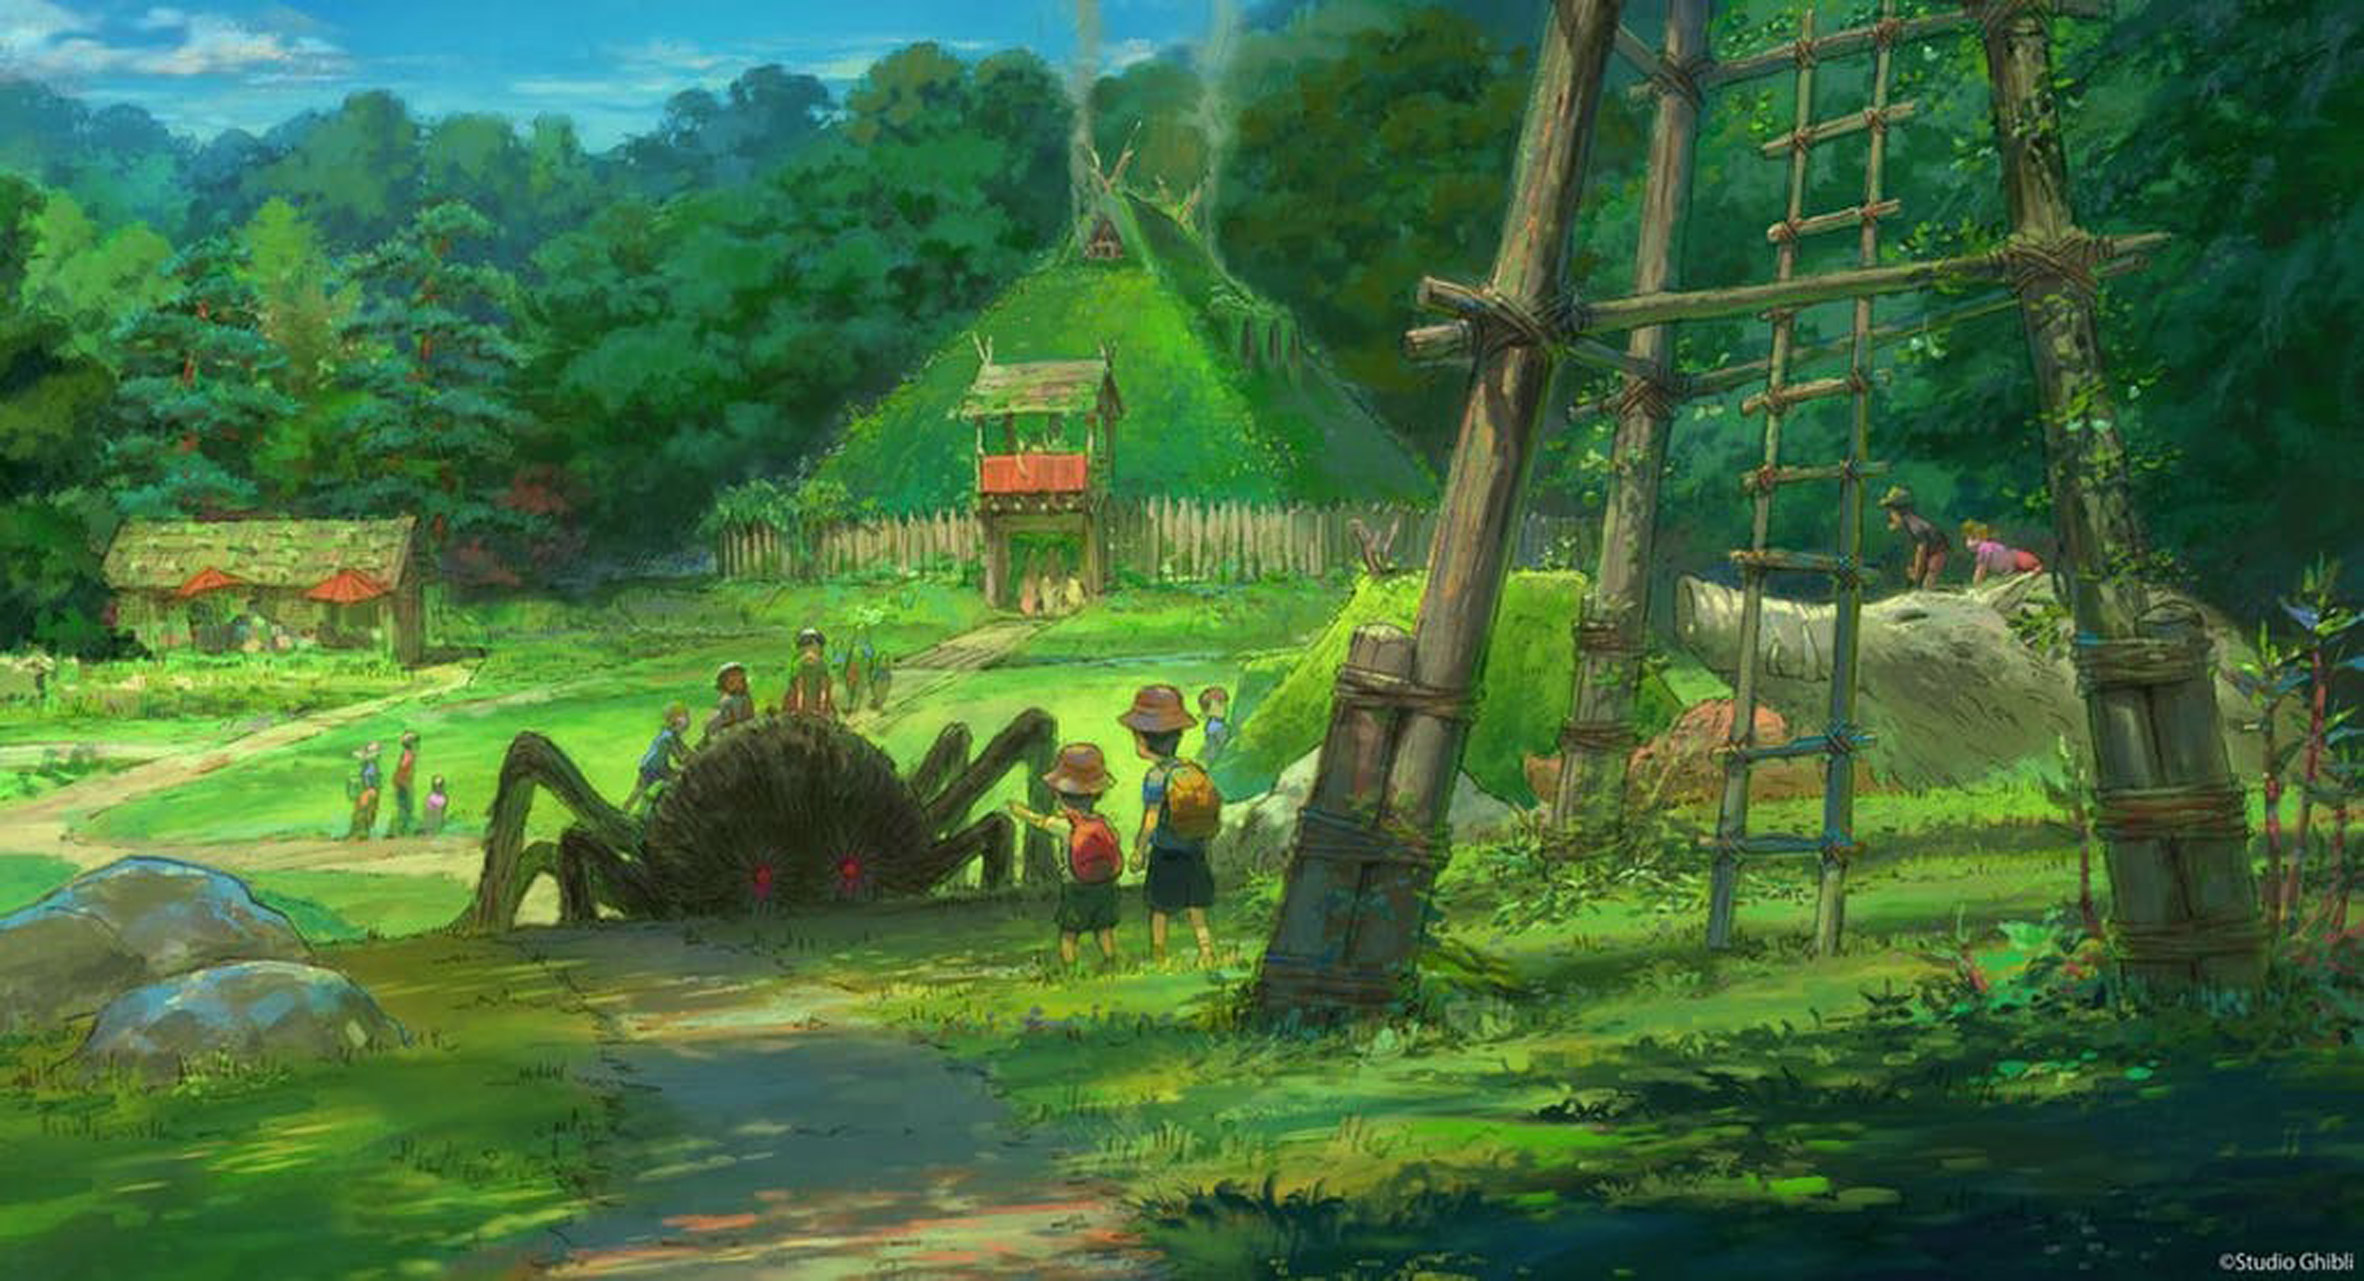 Studio Ghibli announce theme park will open by 2022